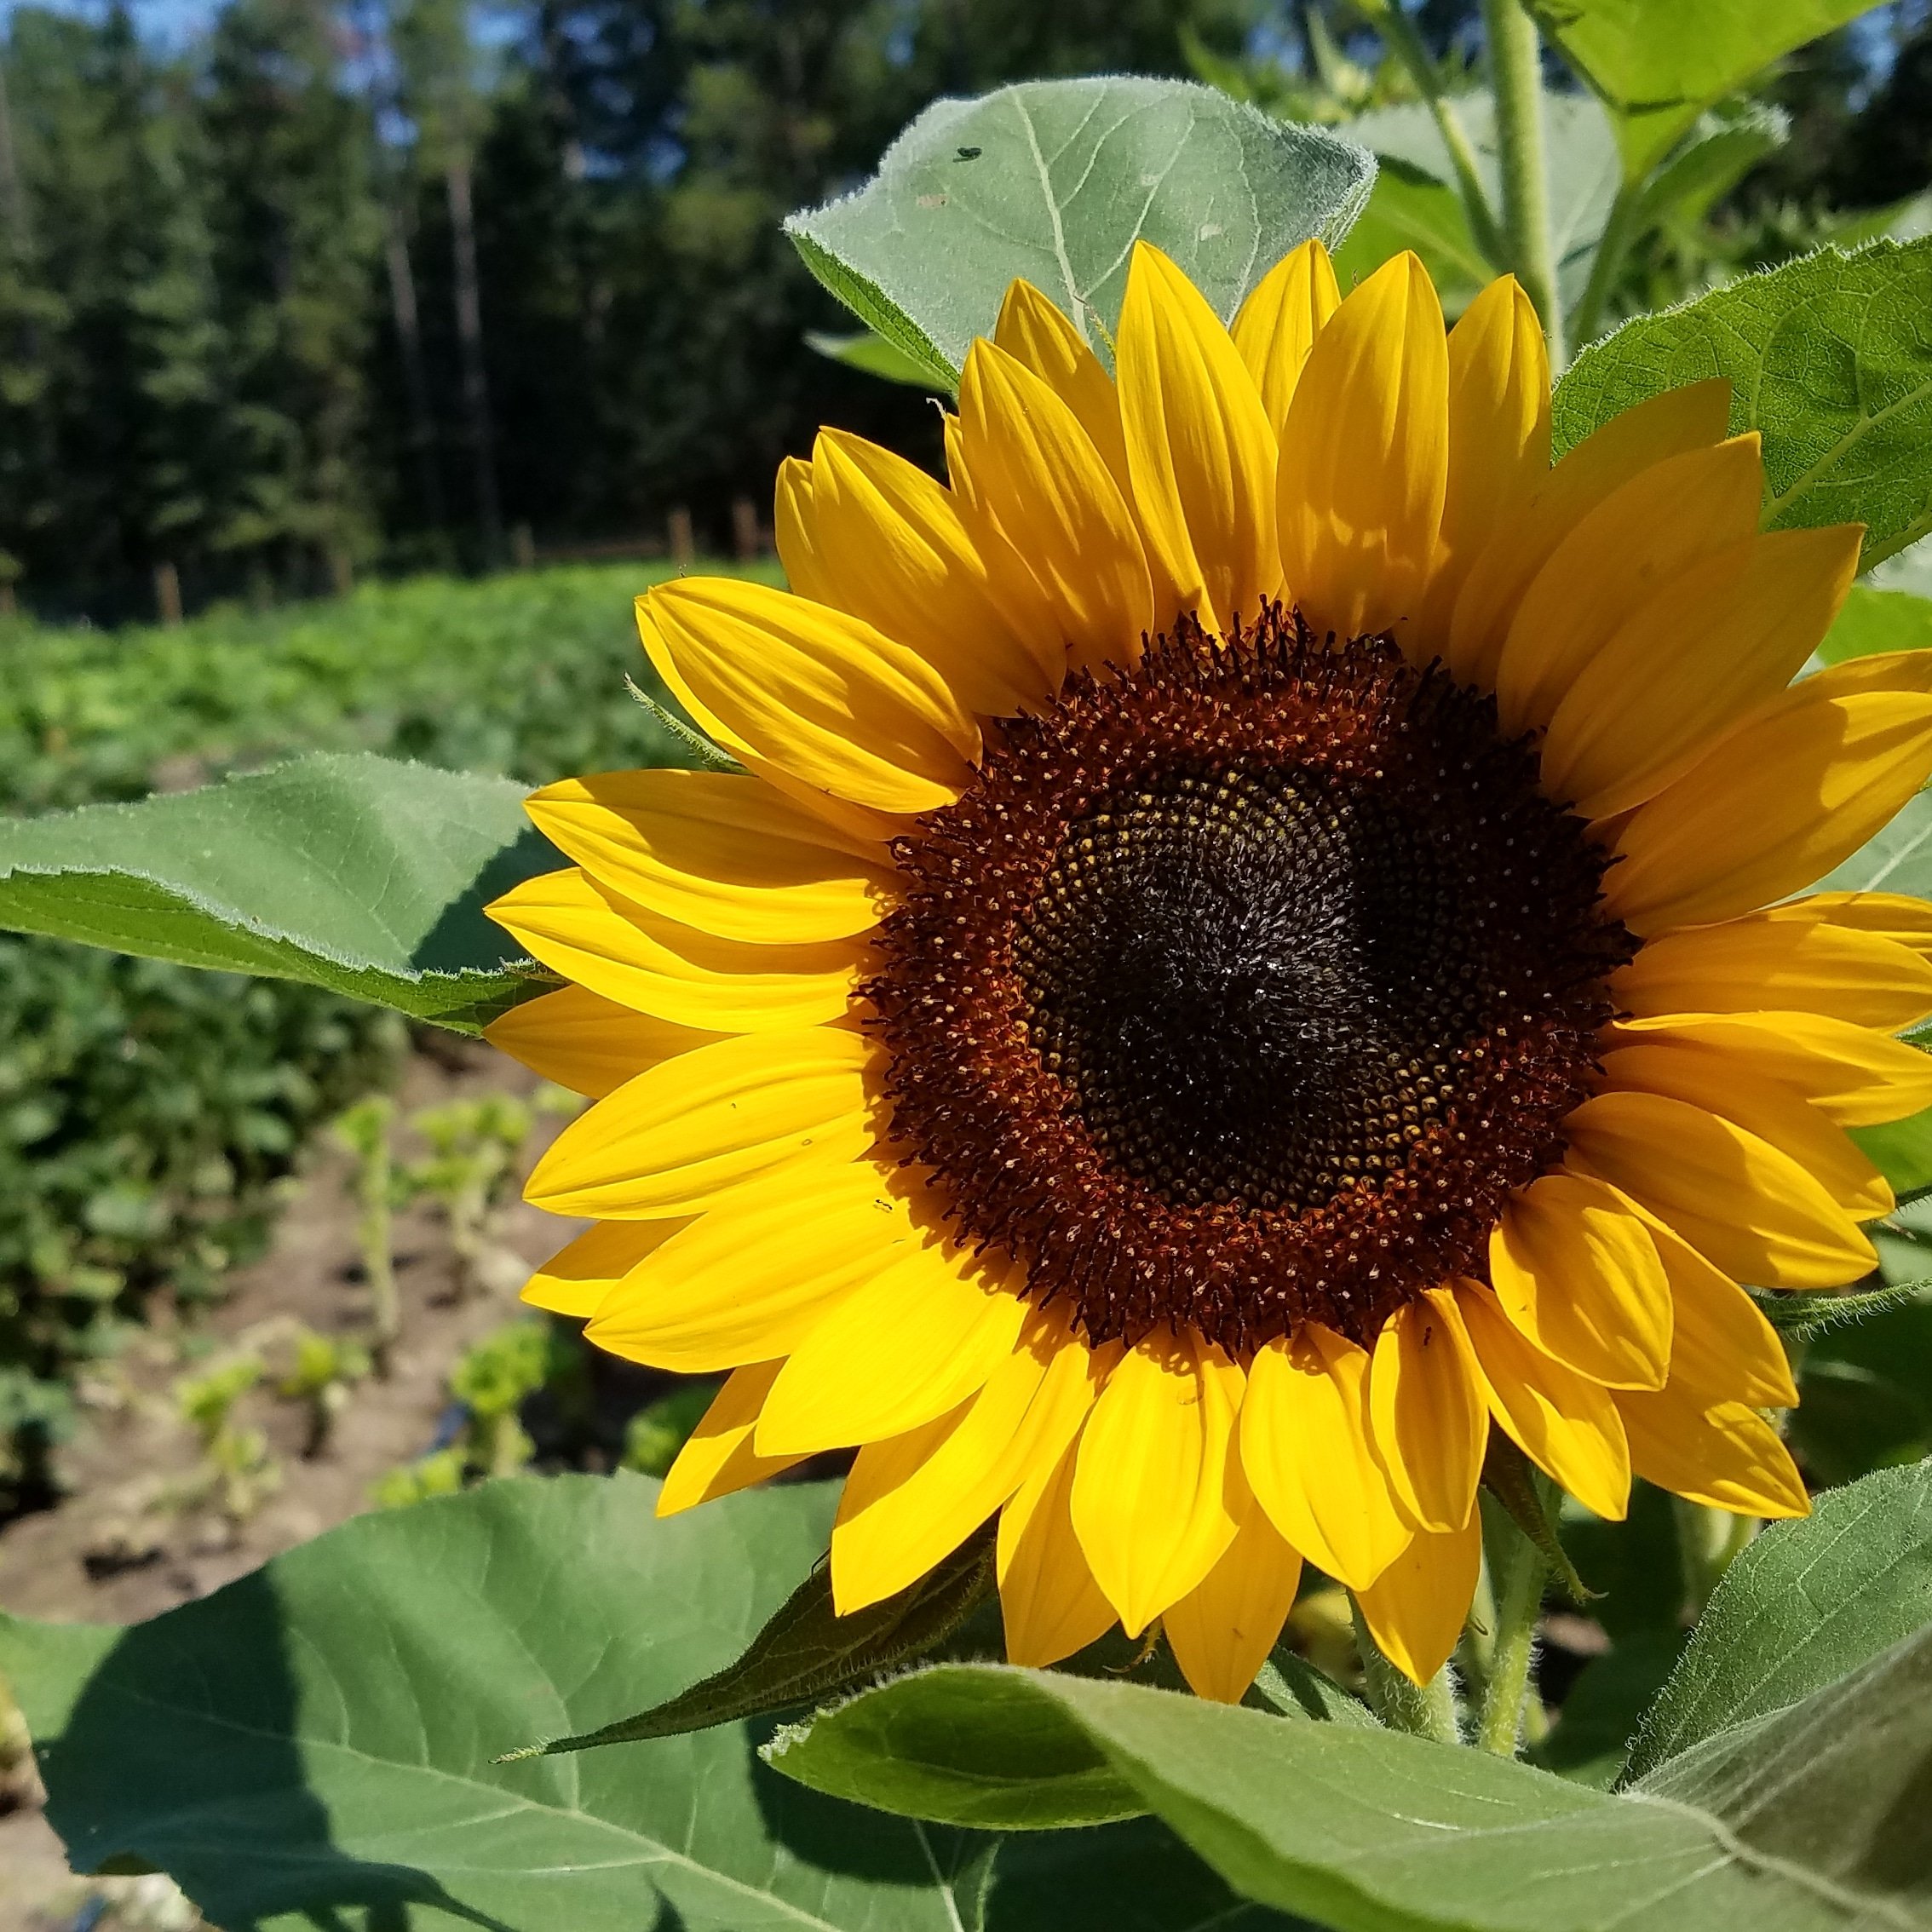 Previous Happening: Farm Happenings for August 21, 2019